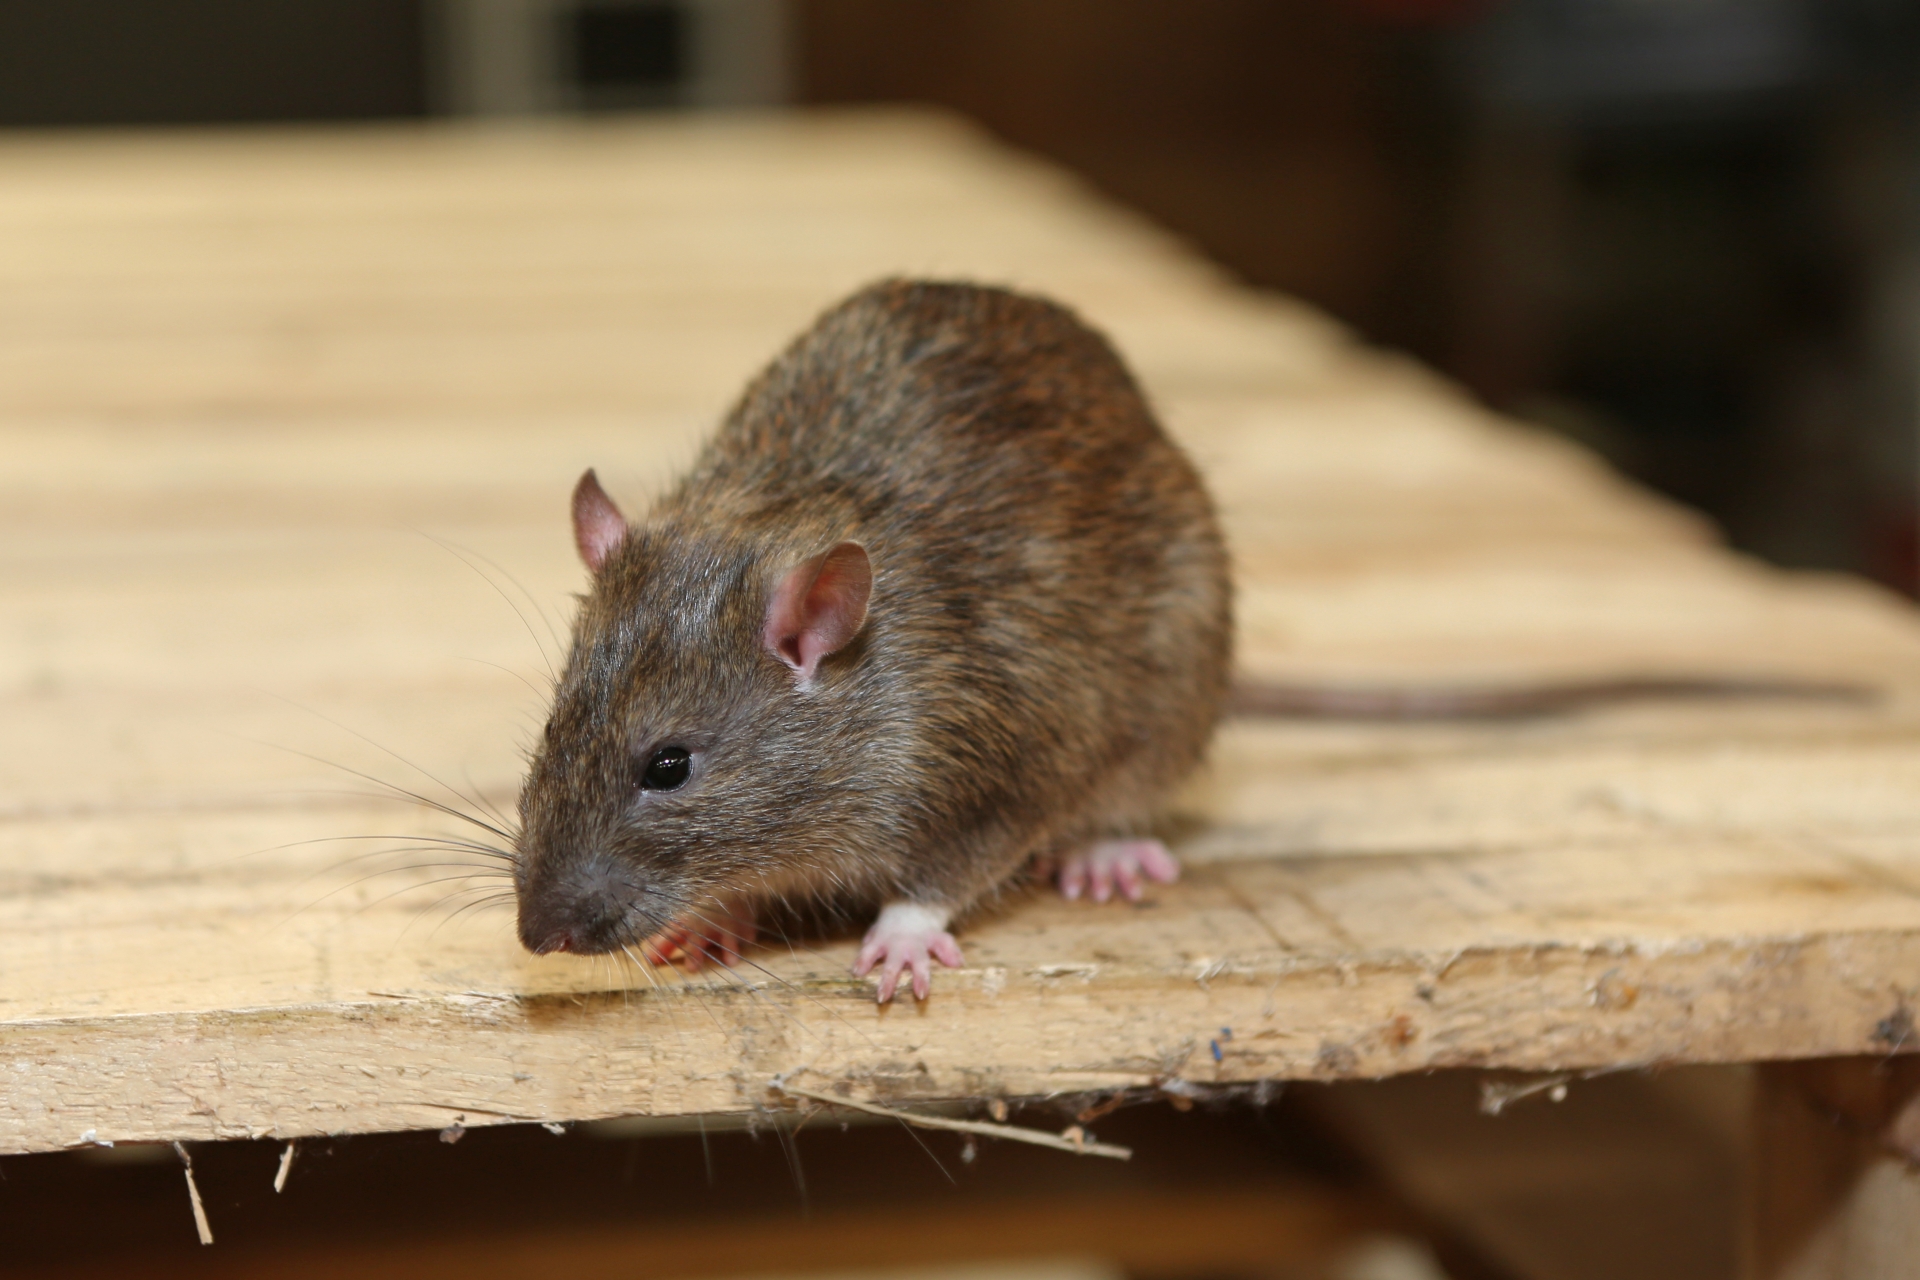 Rat Control, Pest Control in Belgravia, Westminster, SW1. Call Now 020 8166 9746